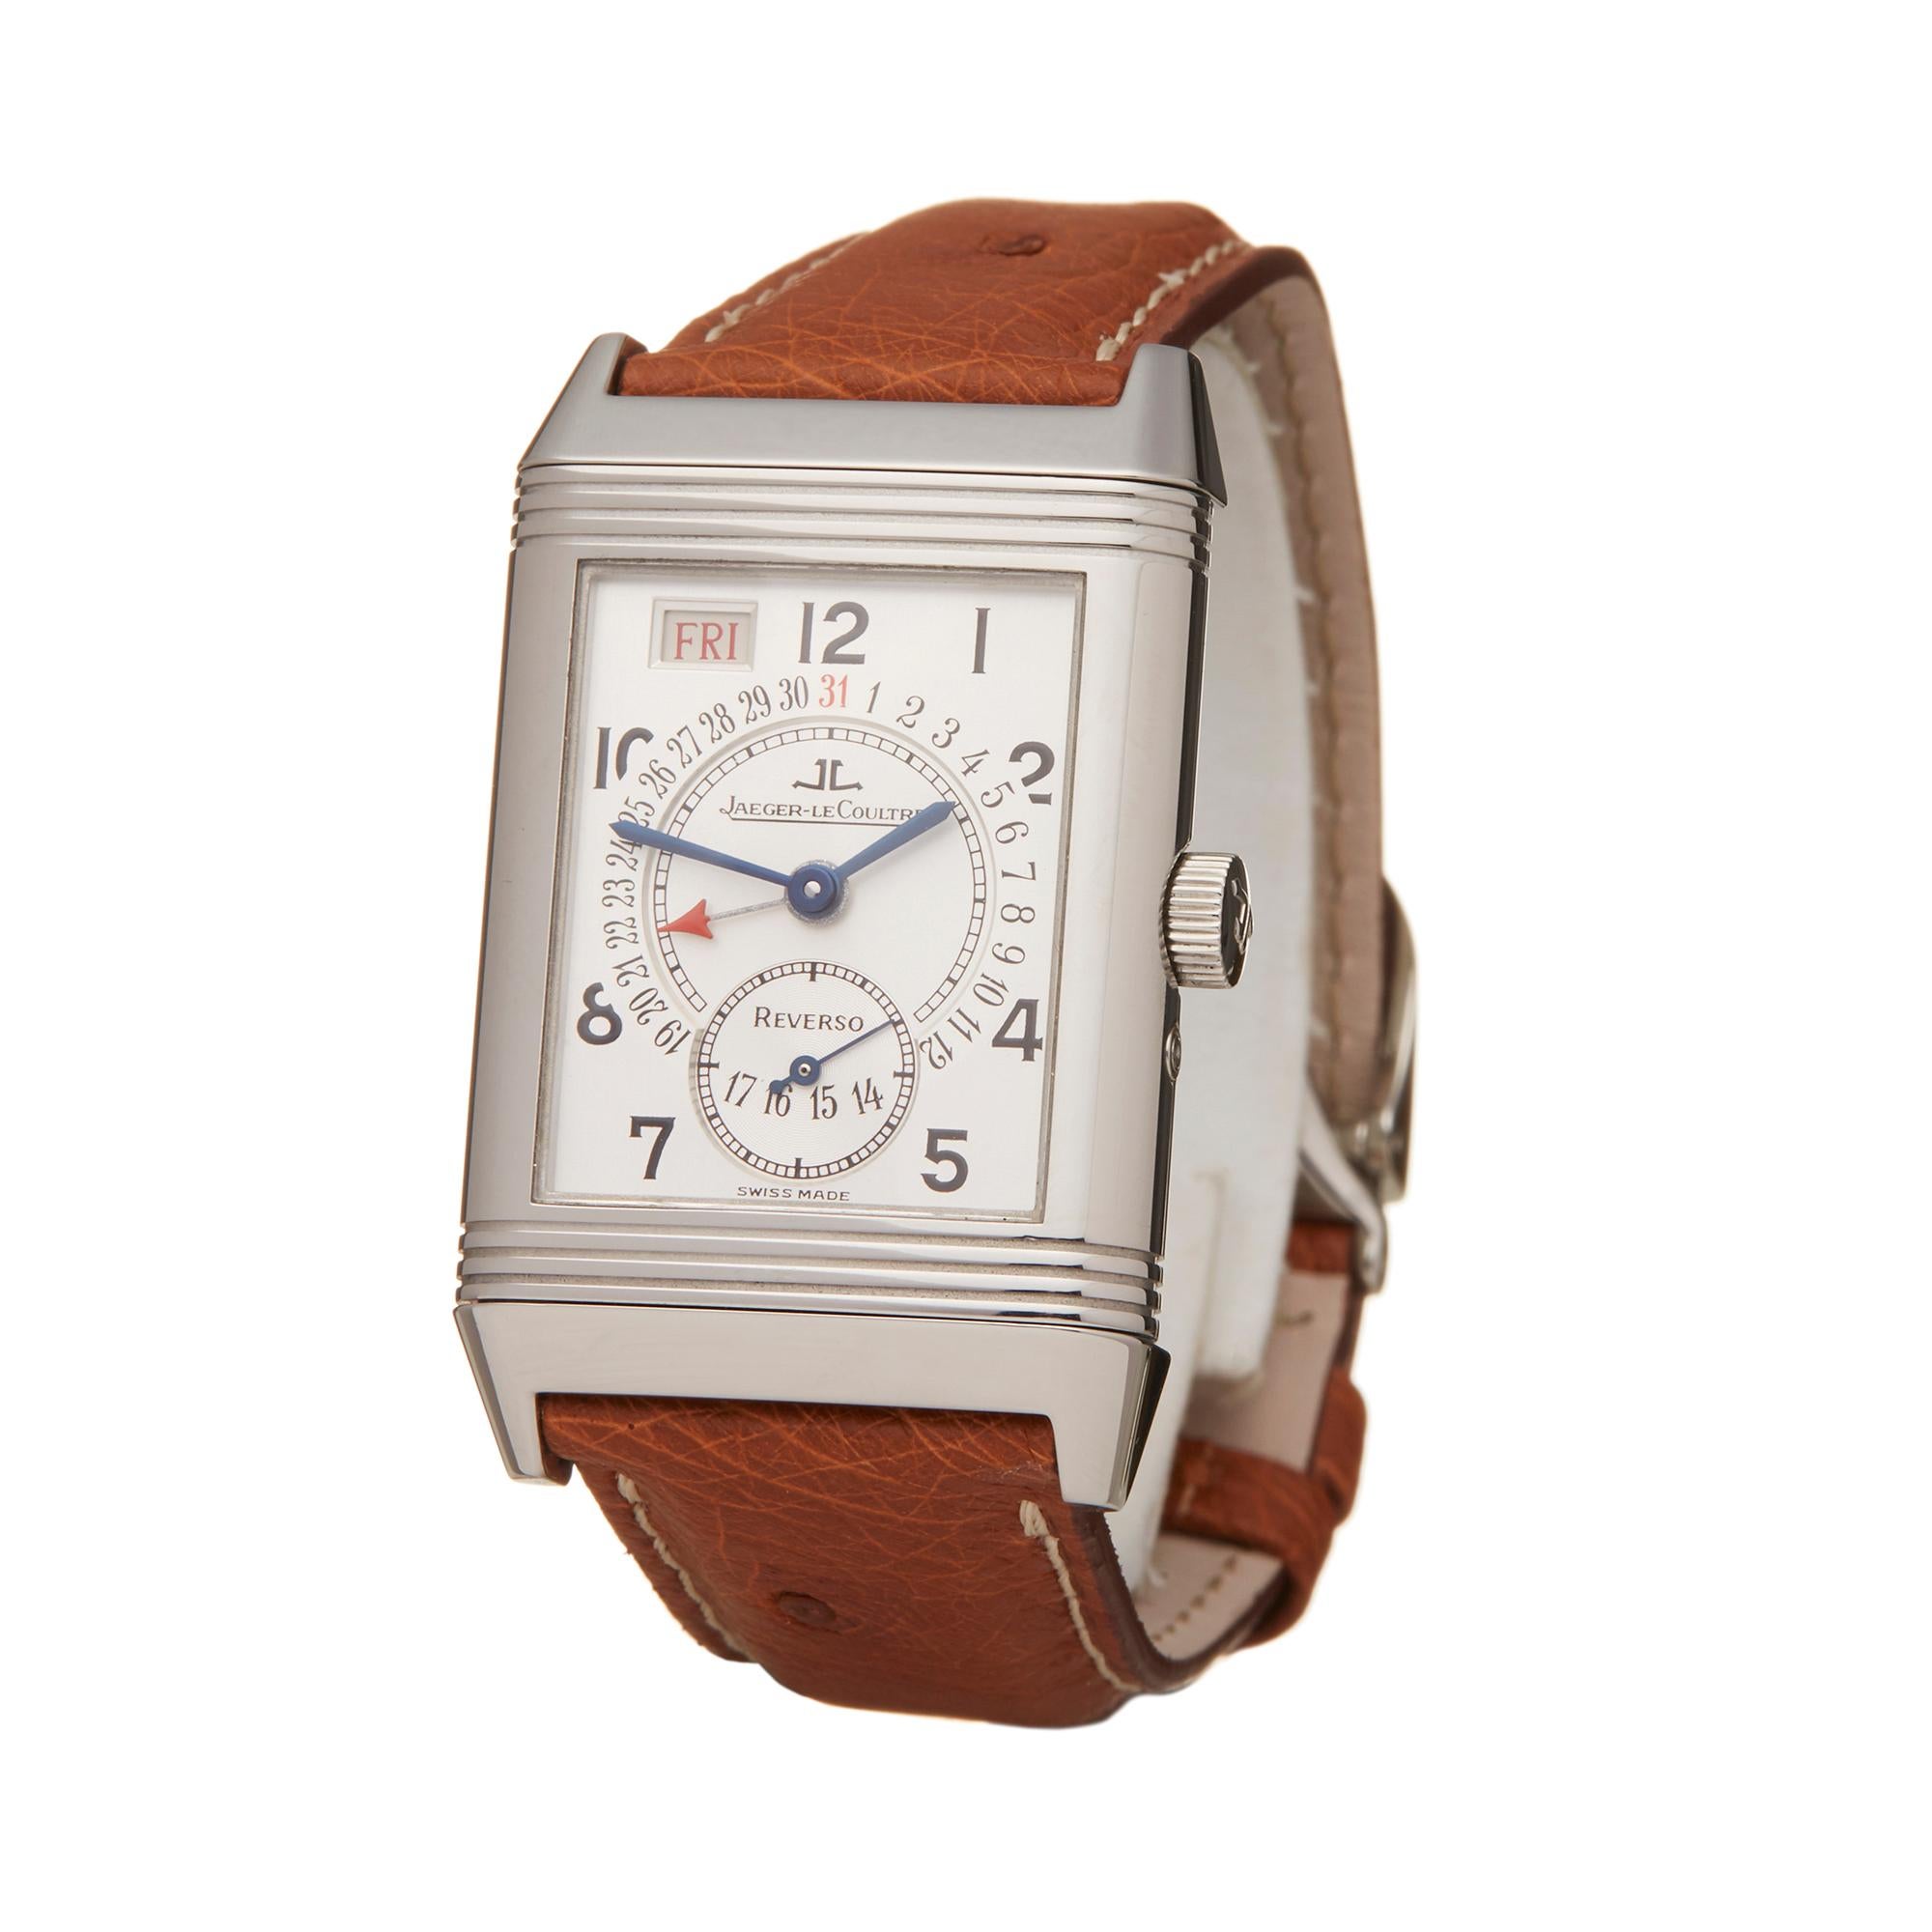 Reference: W5828
Manufacturer: Jaeger-LeCoultre
Model: Reverso
Model Reference: 270.8.36
Age: Circa 2000's
Gender: Men's
Box and Papers: Box and Service Papers
Dial: Silver Arabic
Glass: Sapphire Crystal
Movement: Mechanical Wind
Water Resistance: